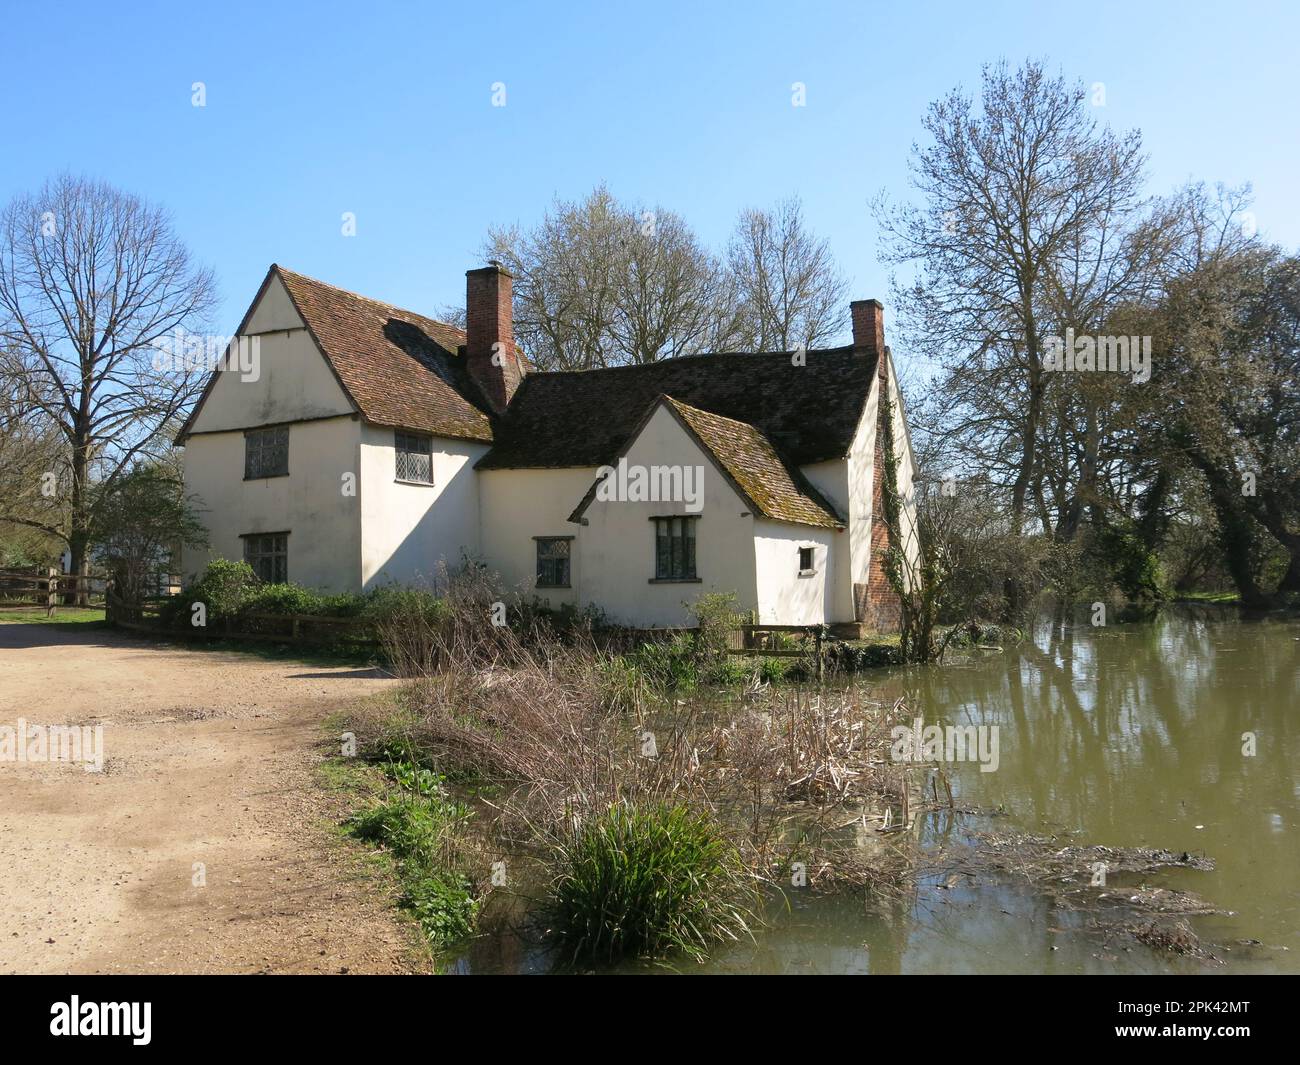 Famous from its depiction in Constable's painting 'The Hay Wain', Willy Lott's Cottage is now a Suffolk landmark owned by the National Trust. Stock Photo